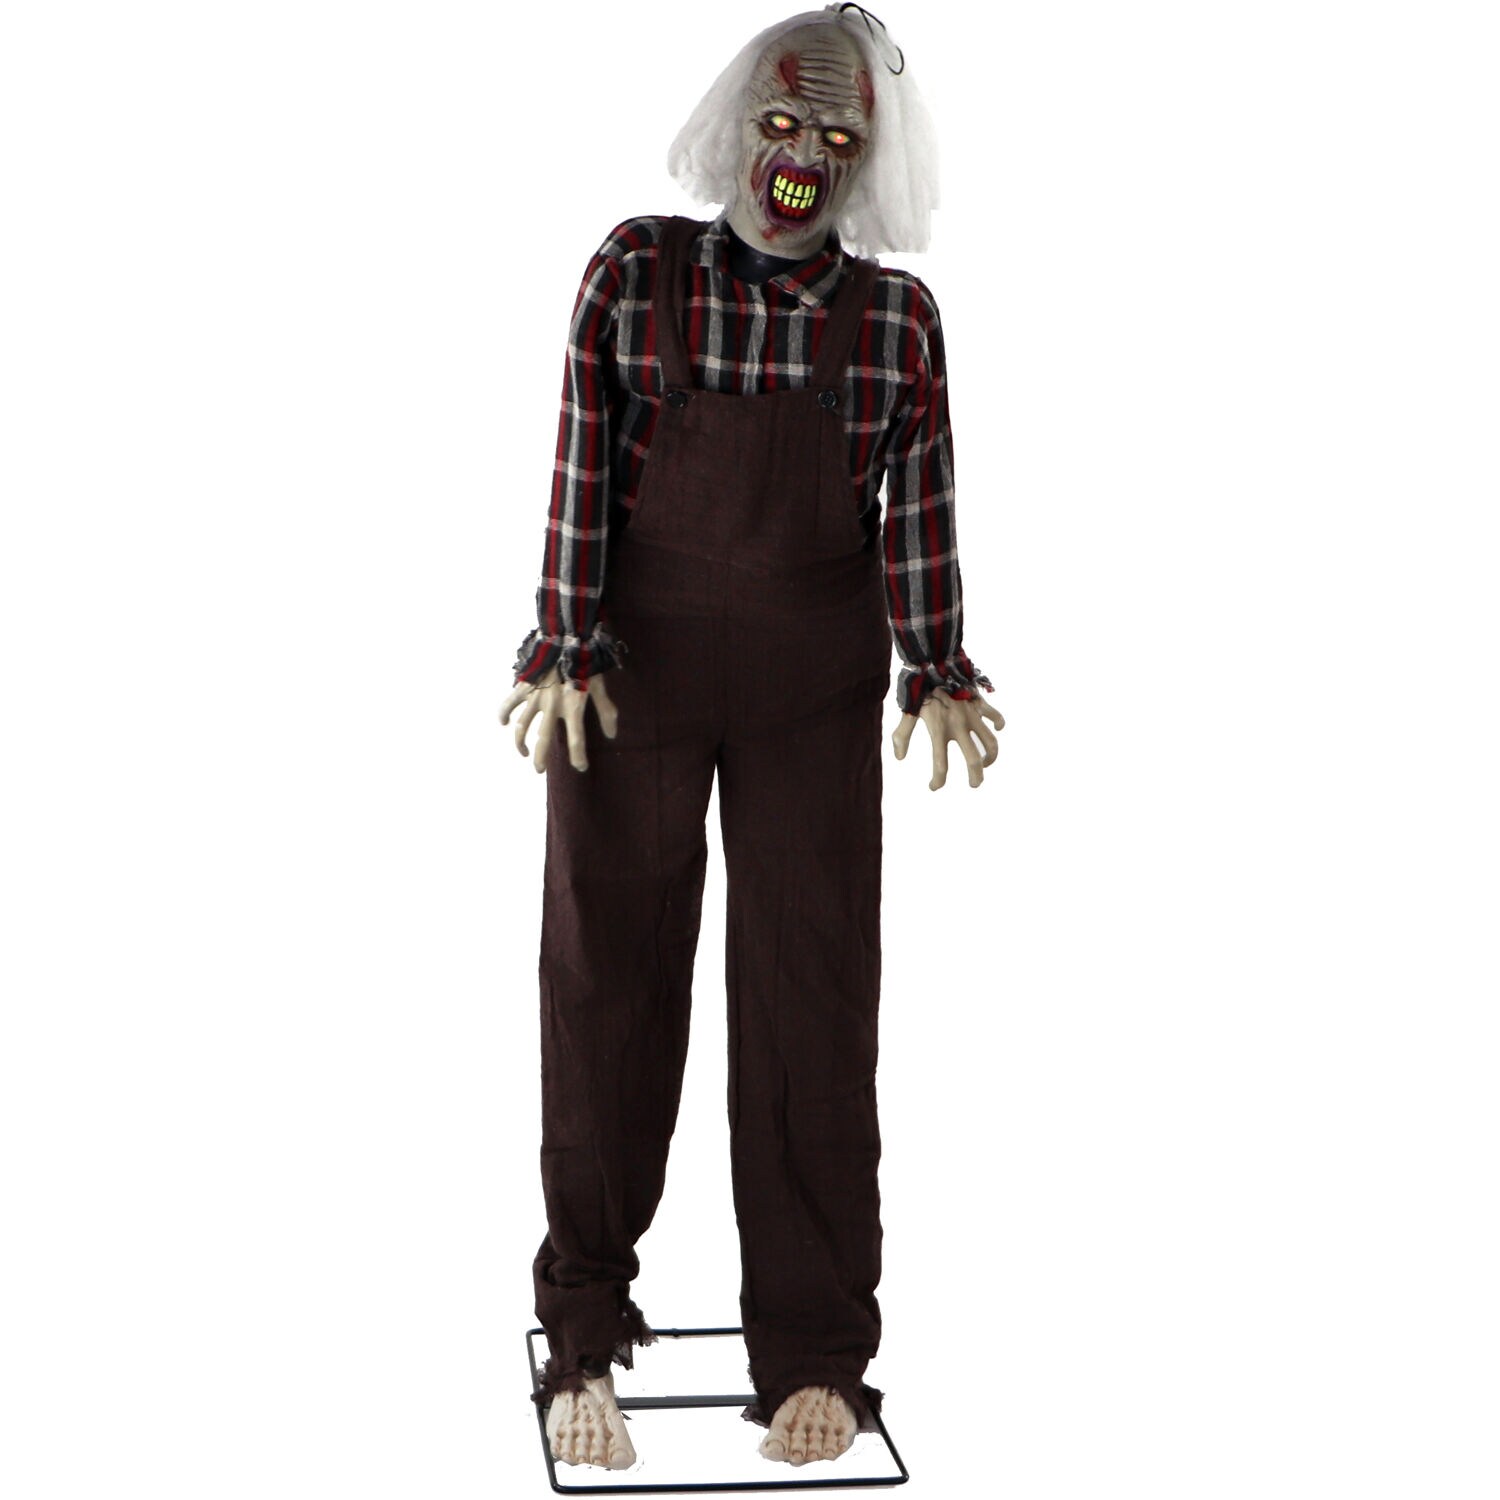 Haunted Hill Farm Freestanding Moaning Lighted Zombie Animatronic in ...